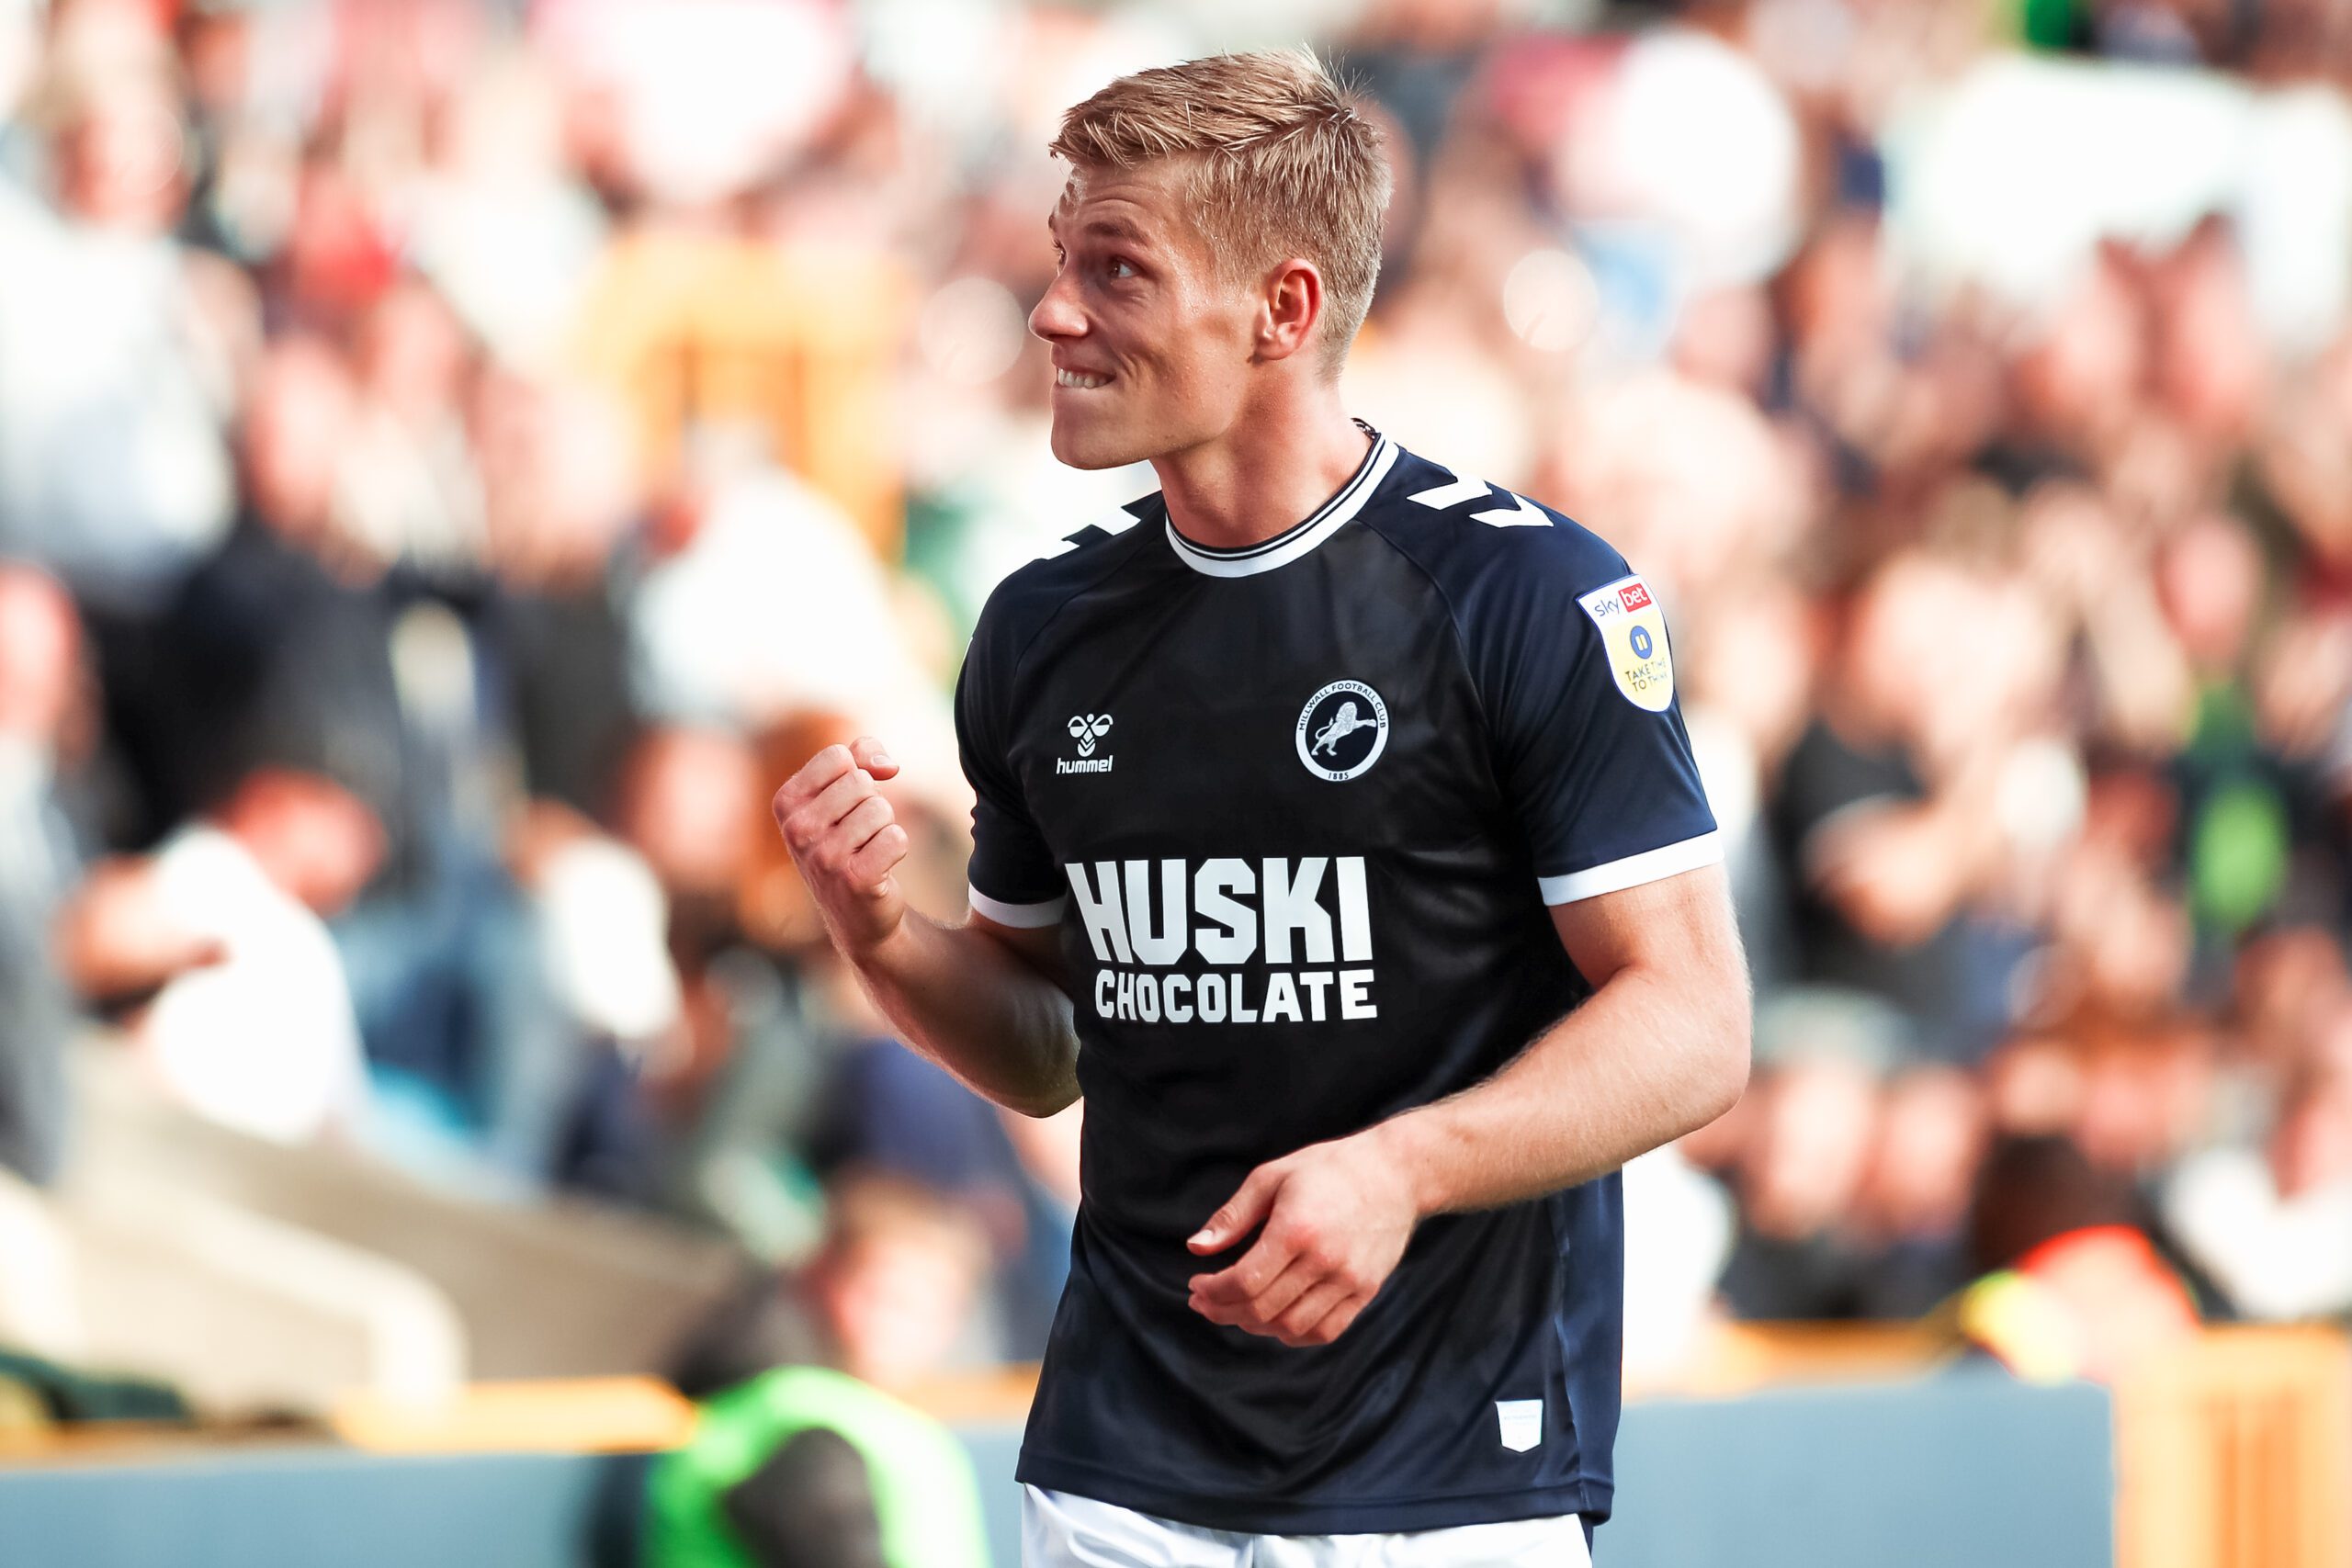 Millwall 2-0 Middlesbrough: Zian Flemming double steers Lions to victory, Football News